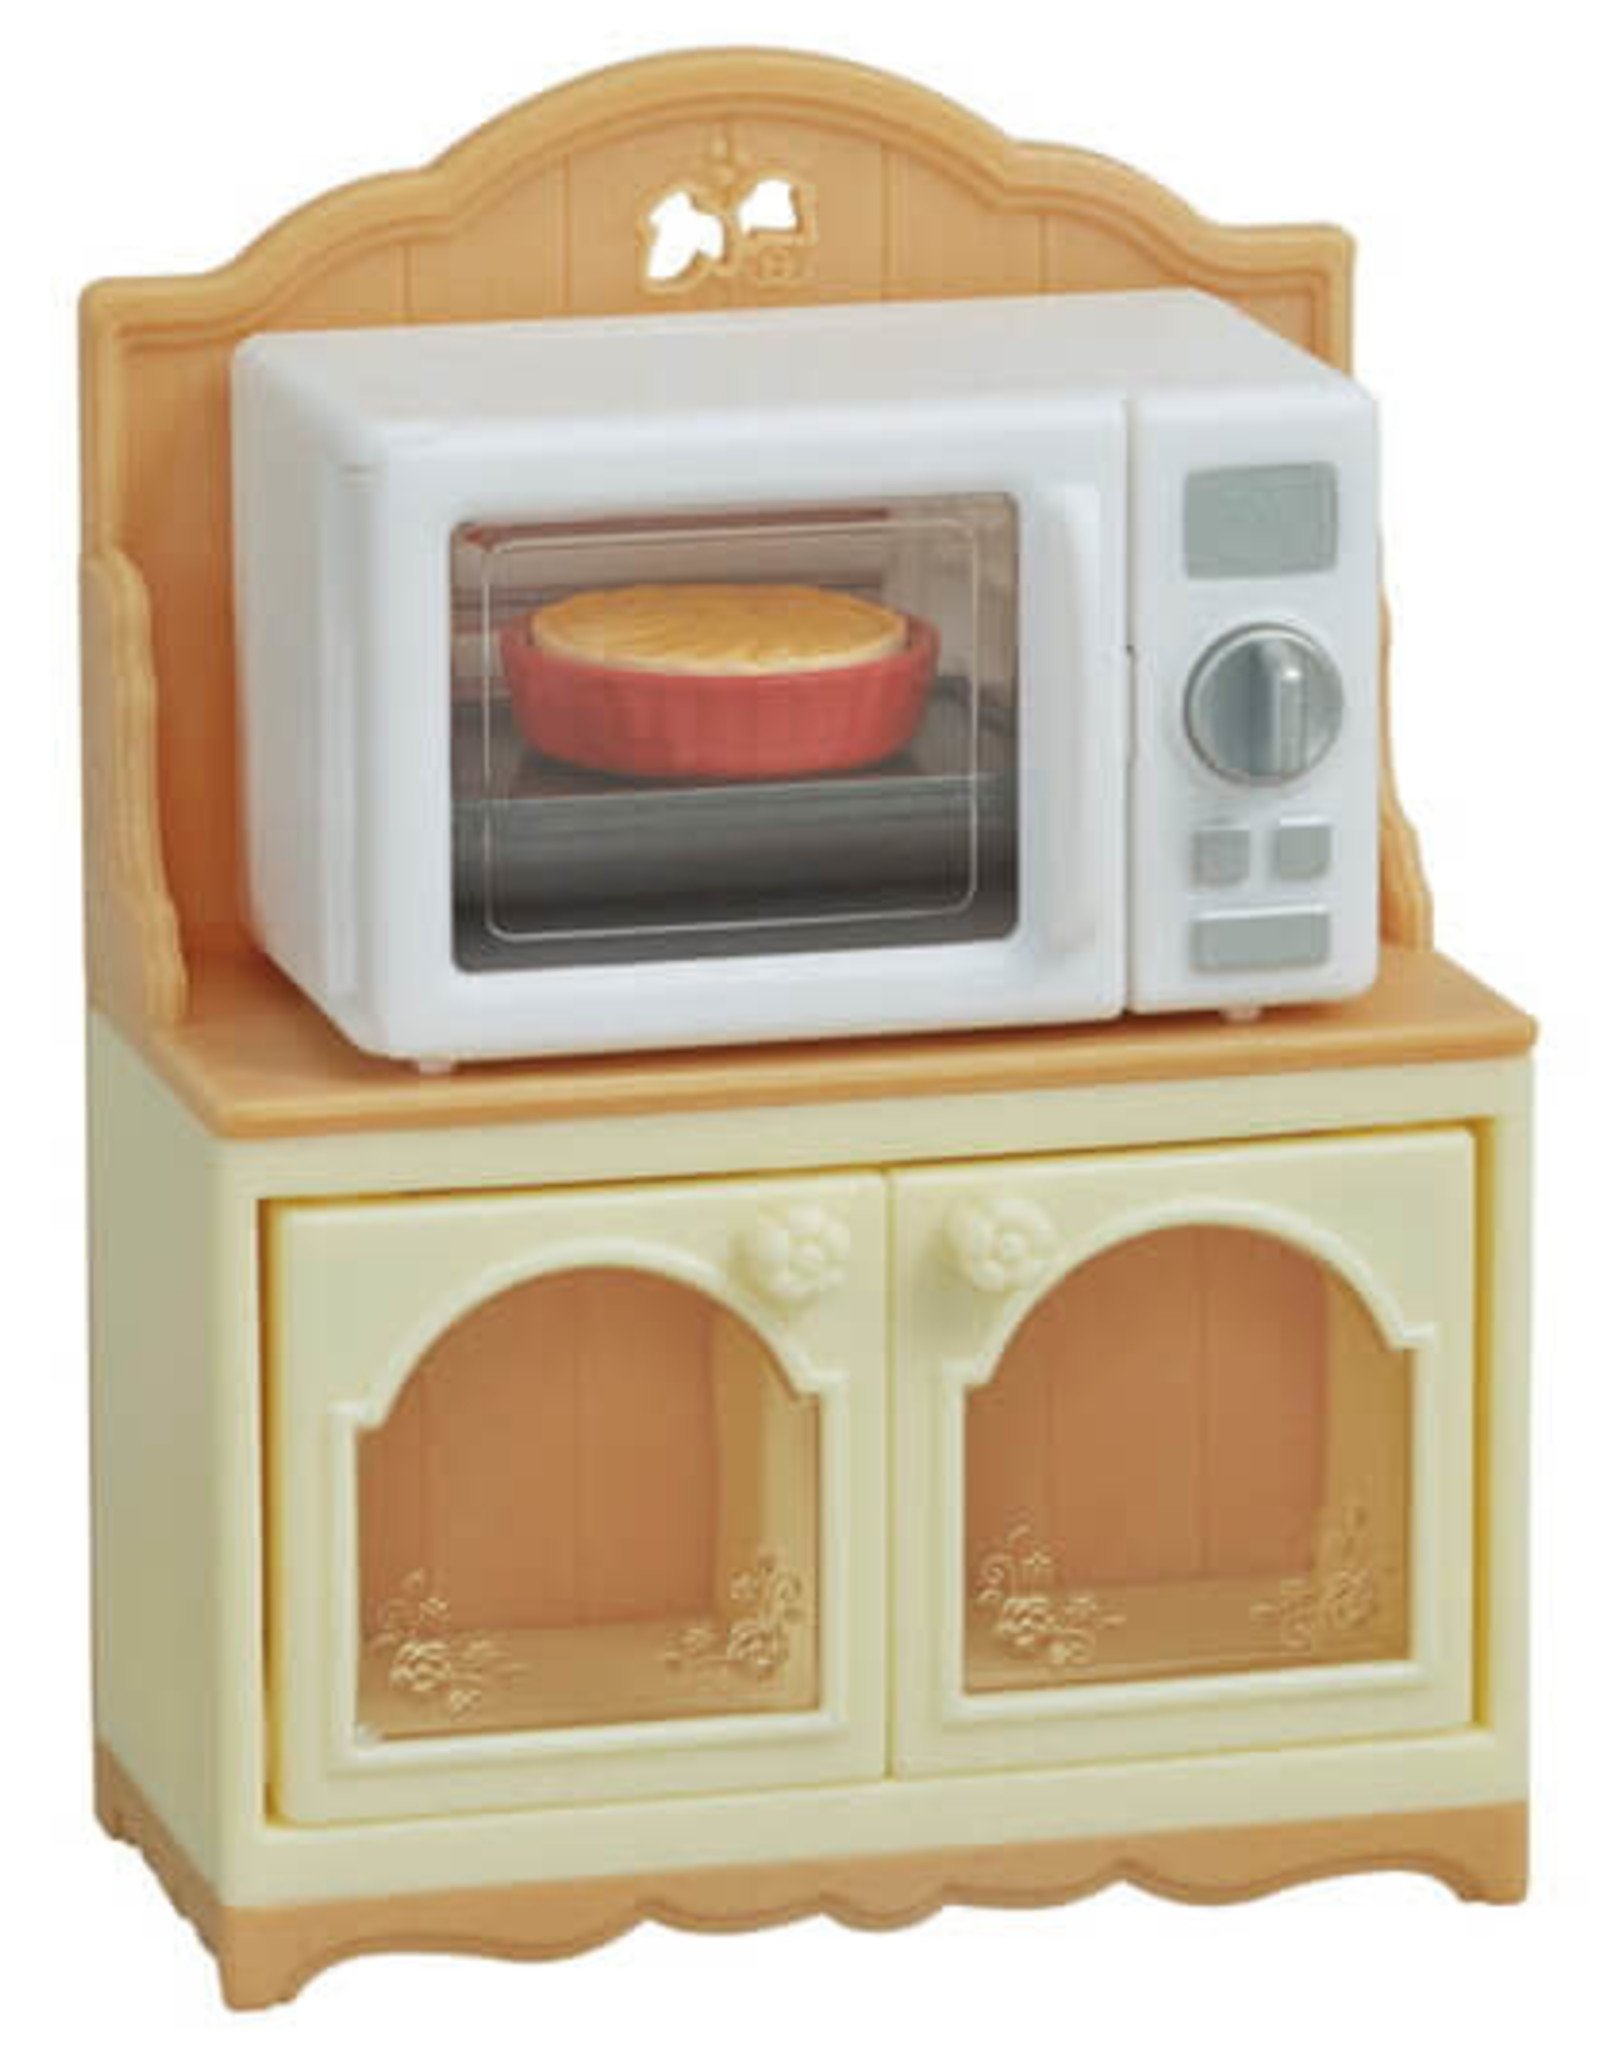 Epoch Everlasting Play Microwave Cabinet